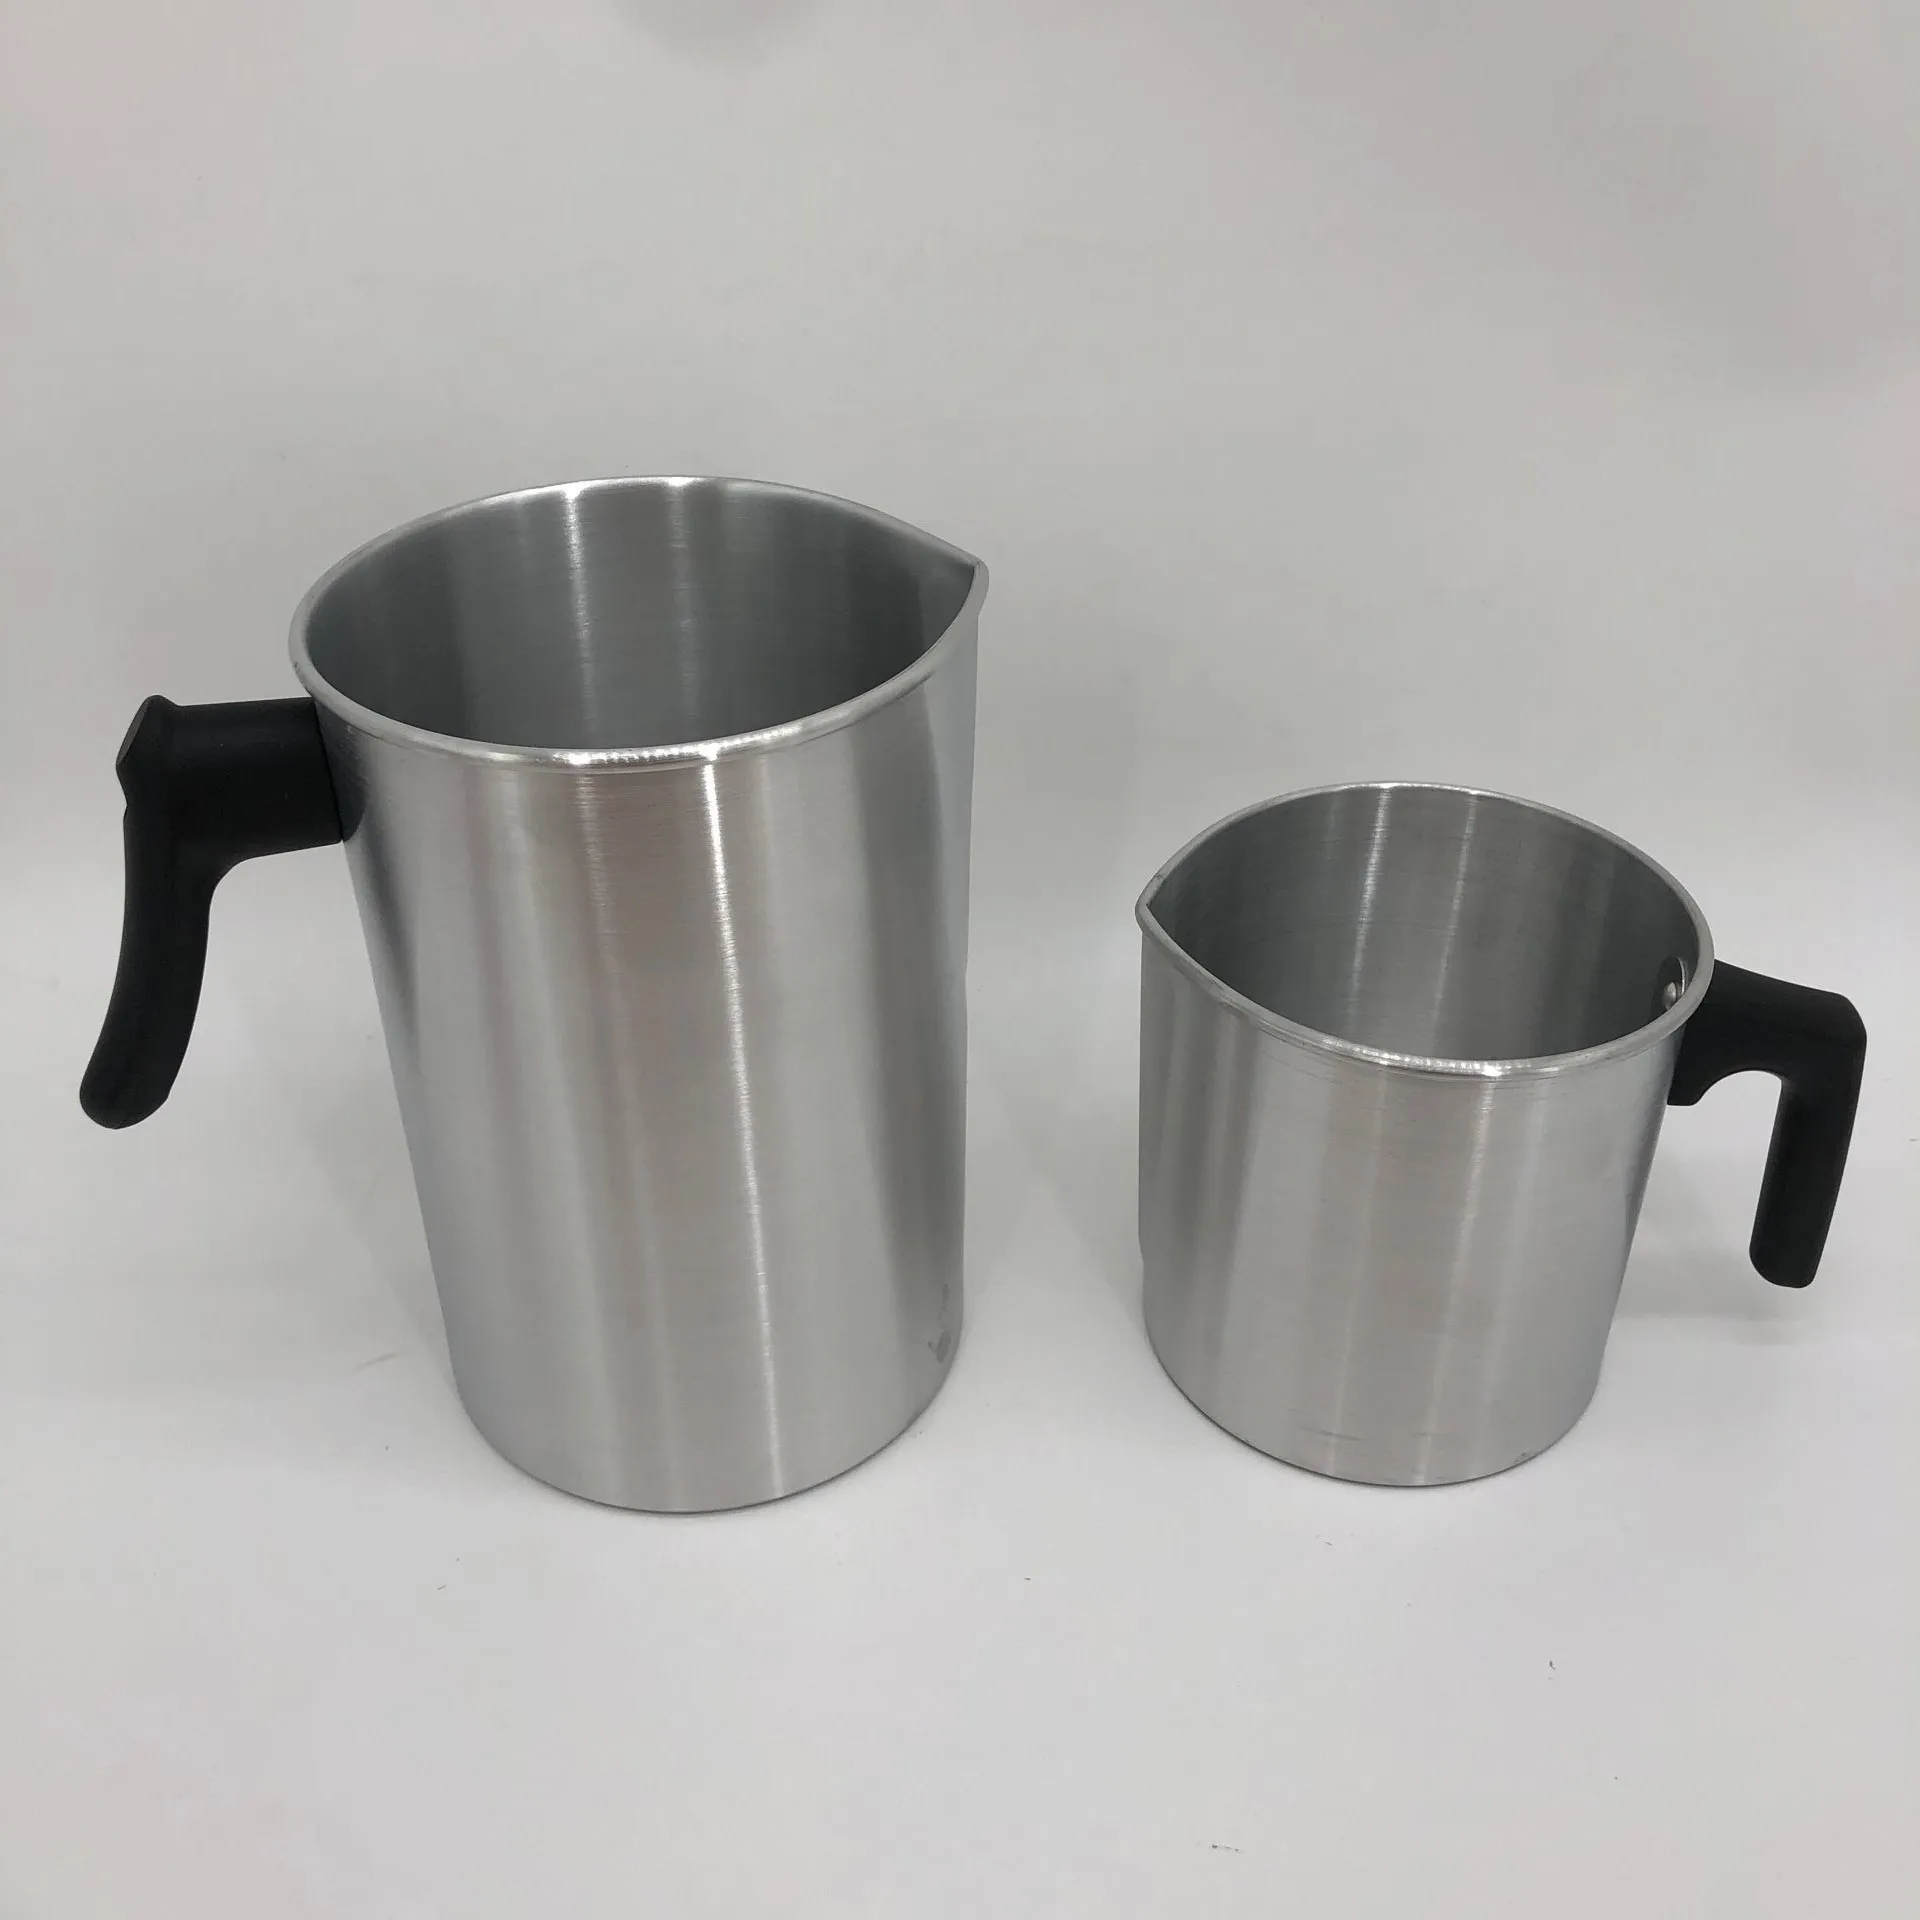 Candle Melting Pot, Candle Melting Cup Large Capacity Heat-Resisting  Anti-Scald Aluminum Construction For Chandlery For Home 